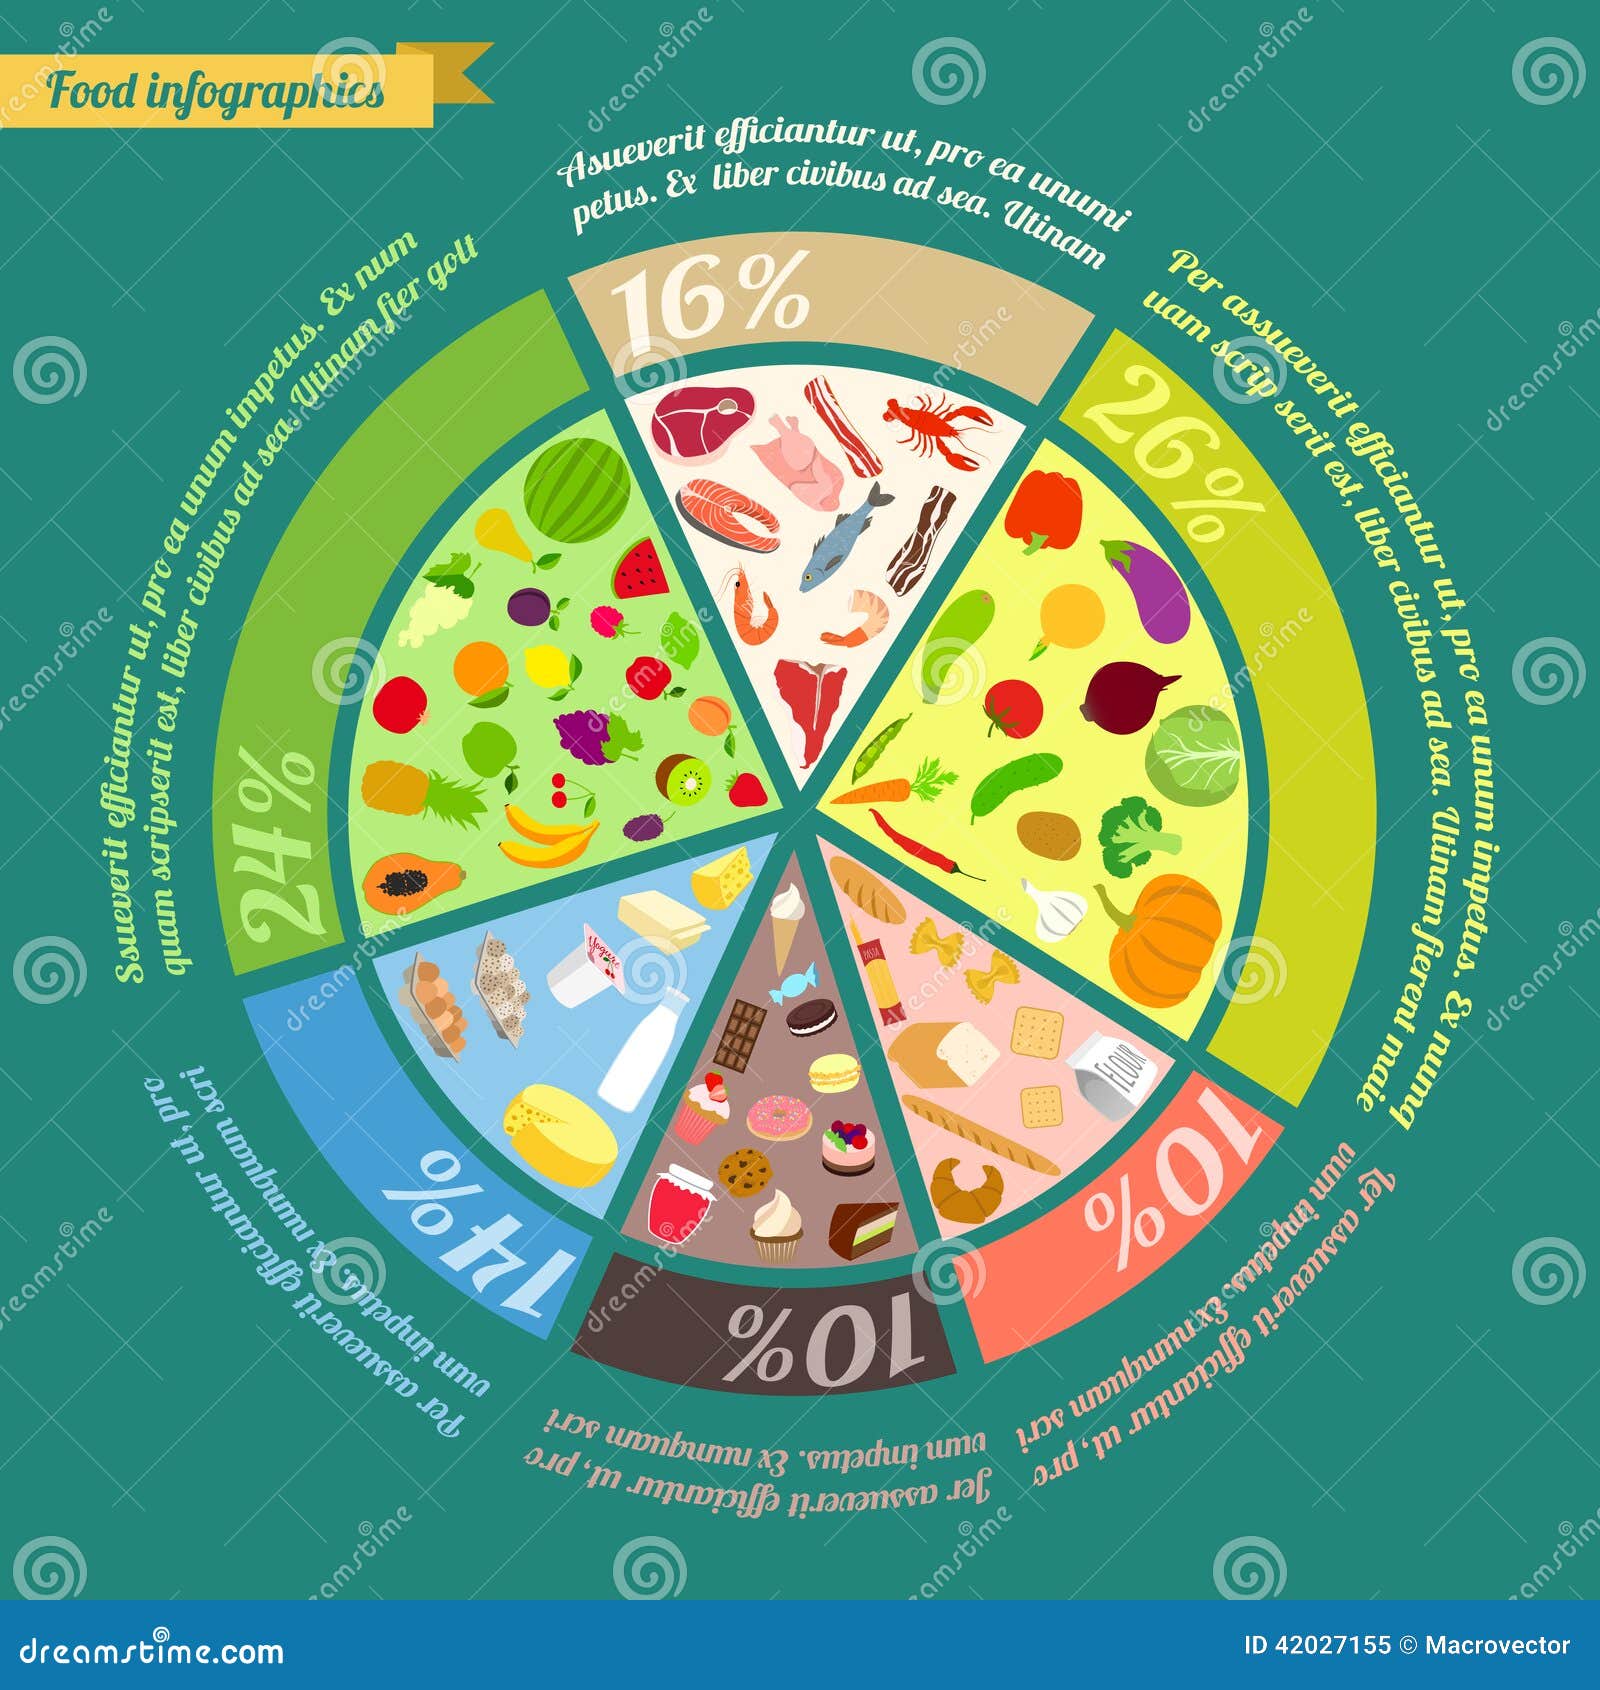 Food Pyramid Infographic Stock Vector - Image: 42027155